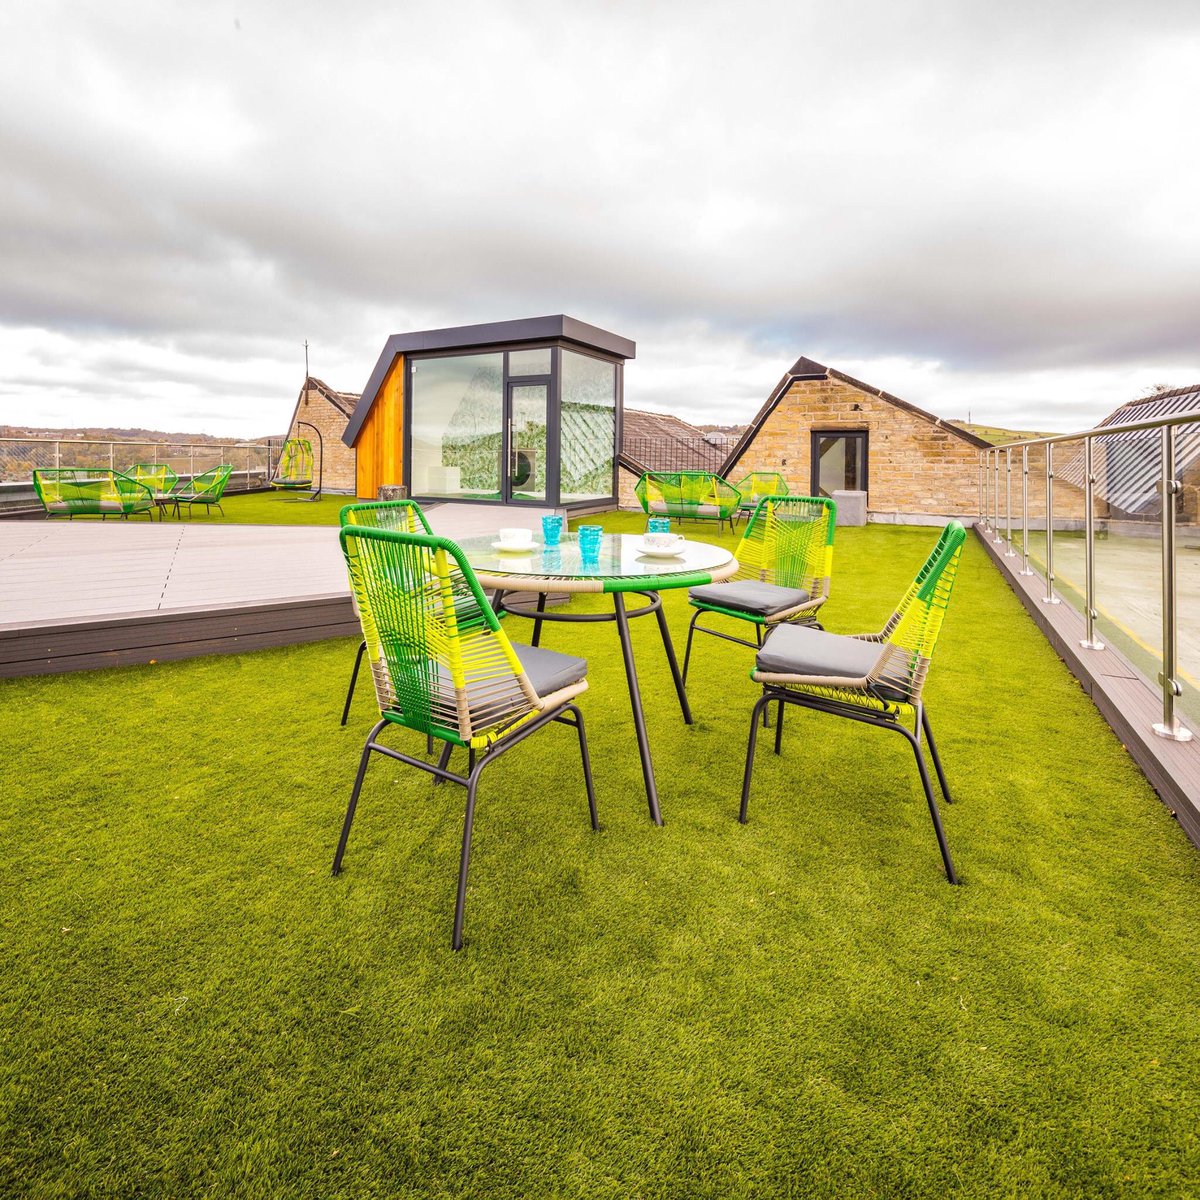 Fancy holding a meeting somewhere a little different? We have our beautiful glass pod on our roof garden at Croft Myl available to hire for just £15.00 per hour. 
#Halifax #meetingspace #roomtohire #rooftopgarden #pod #slide